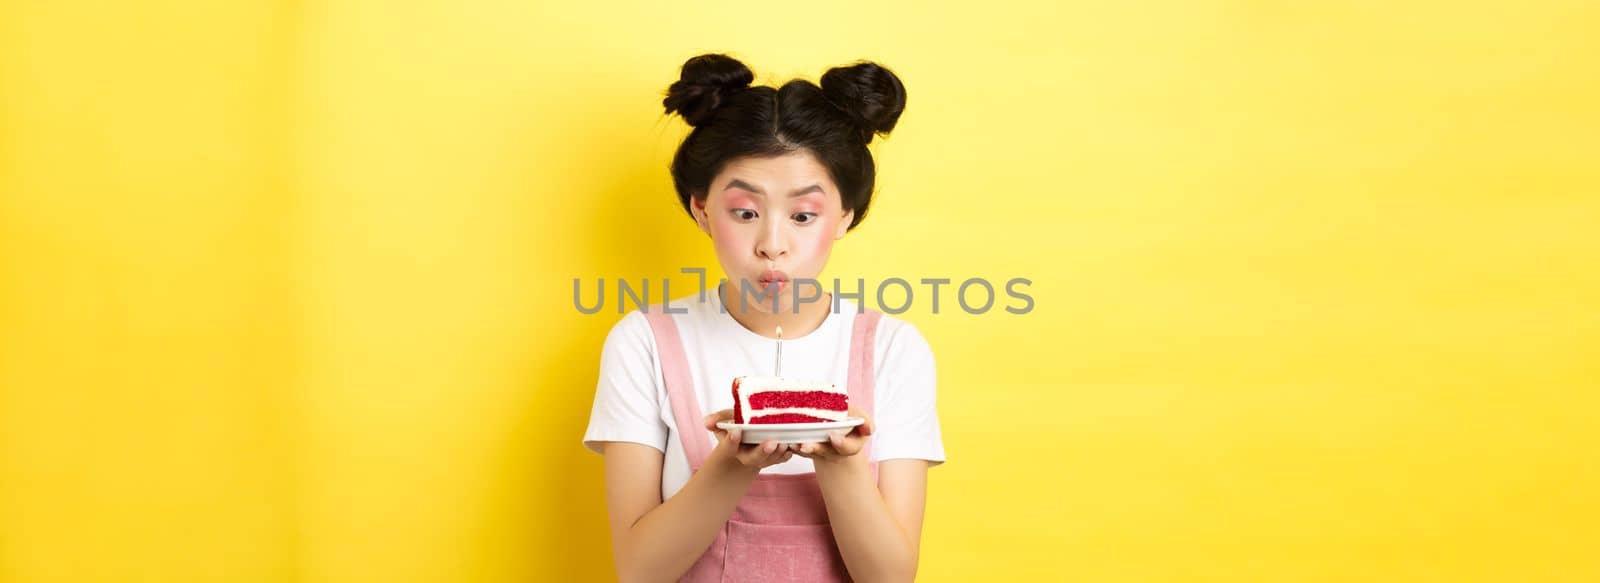 Holidays and celebration. Silly asian girl with glamour makeup, making wish and blowing candle on birthday cake, standing on yellow background.